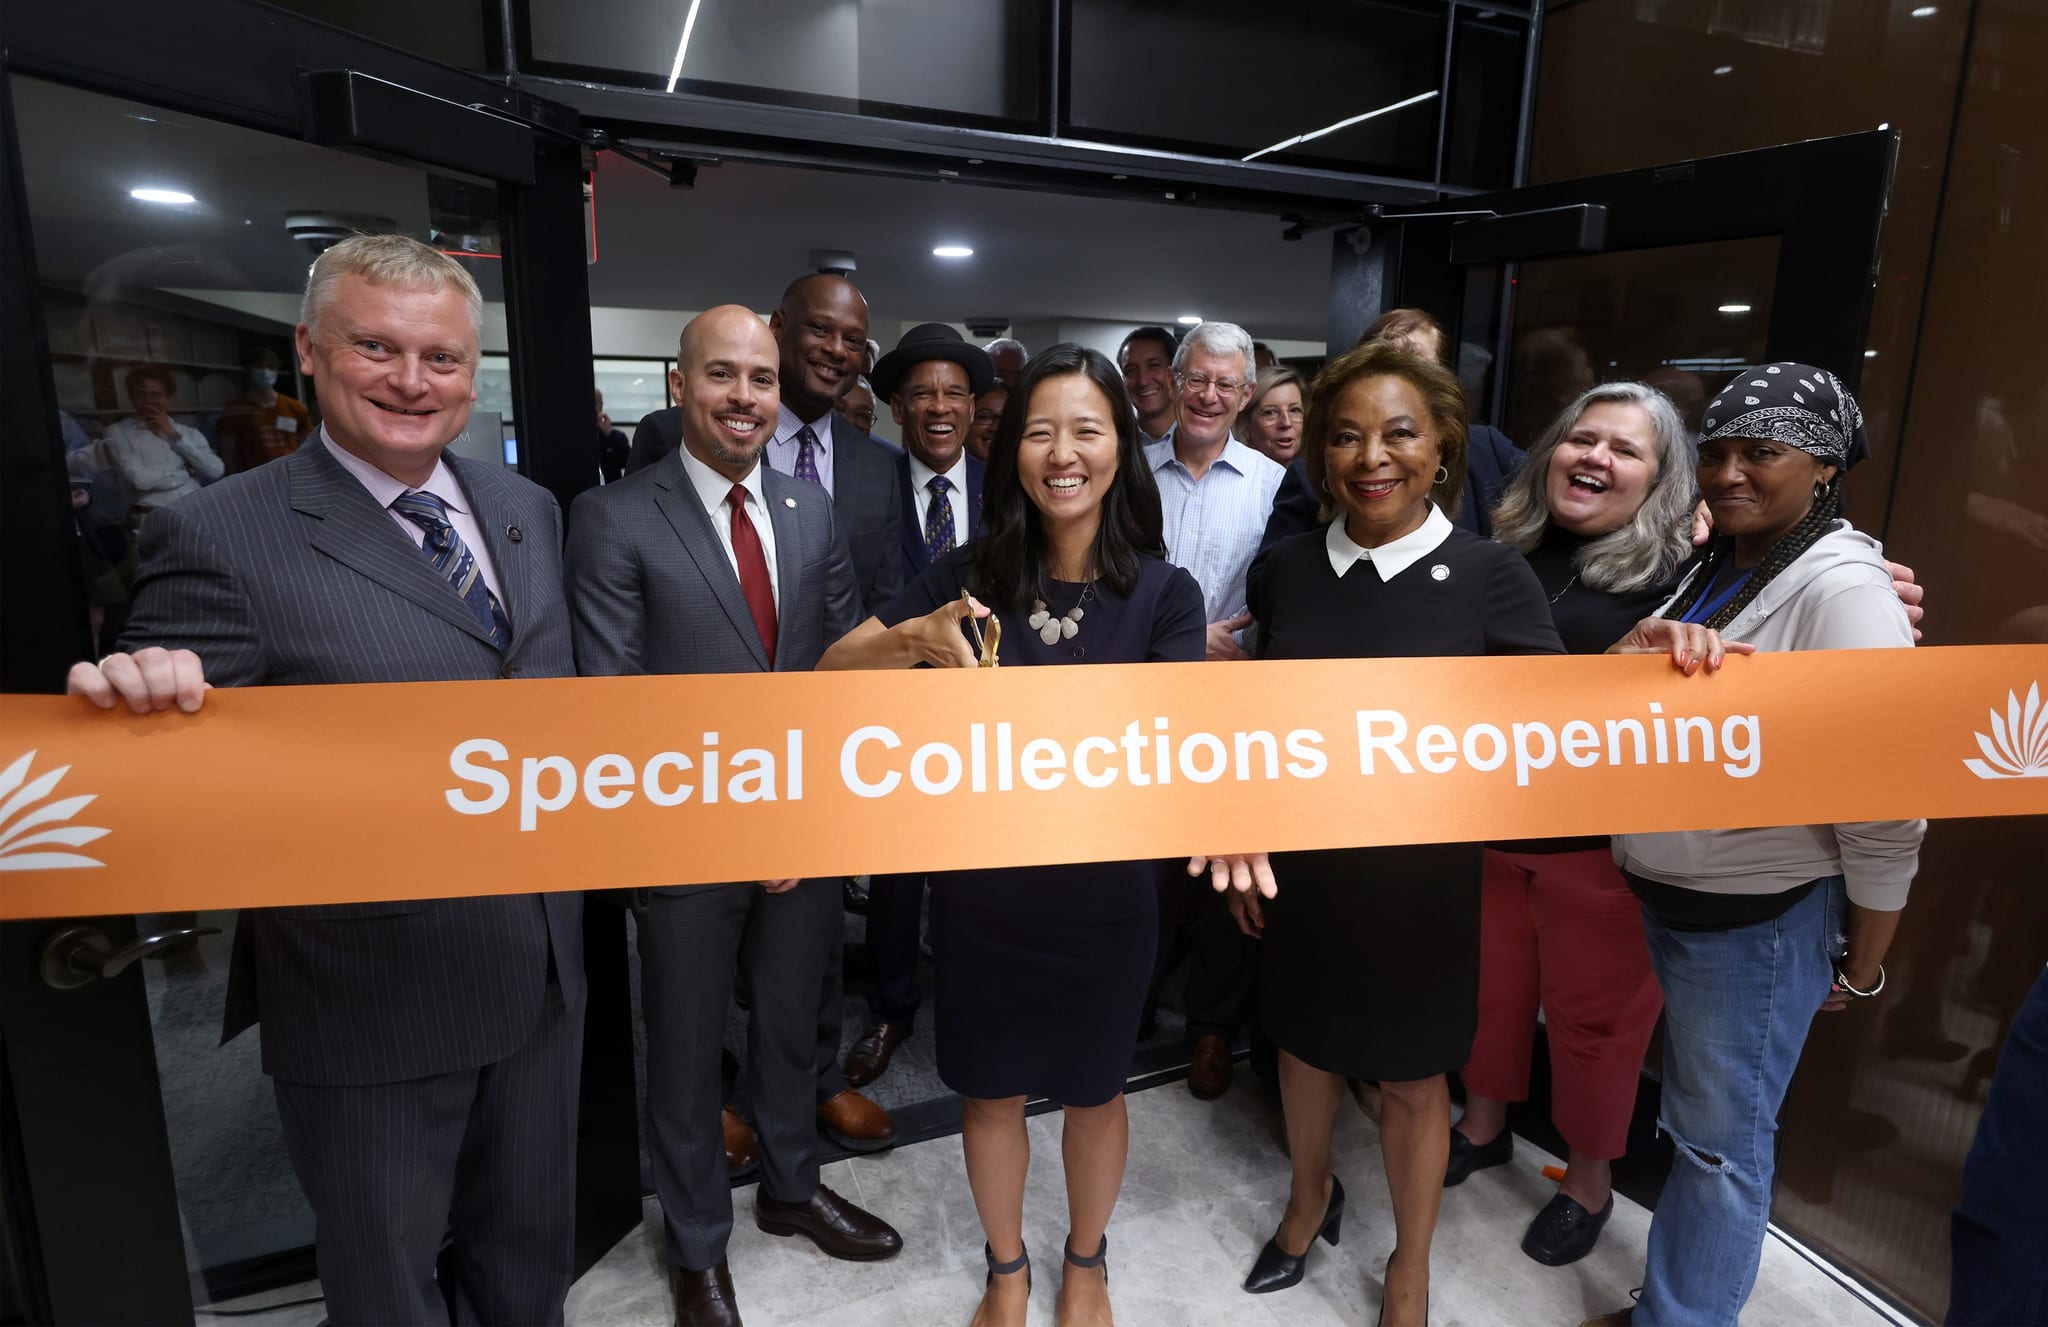 Mayor Michelle Wu cuts the orange Special Collections reopening ribbon